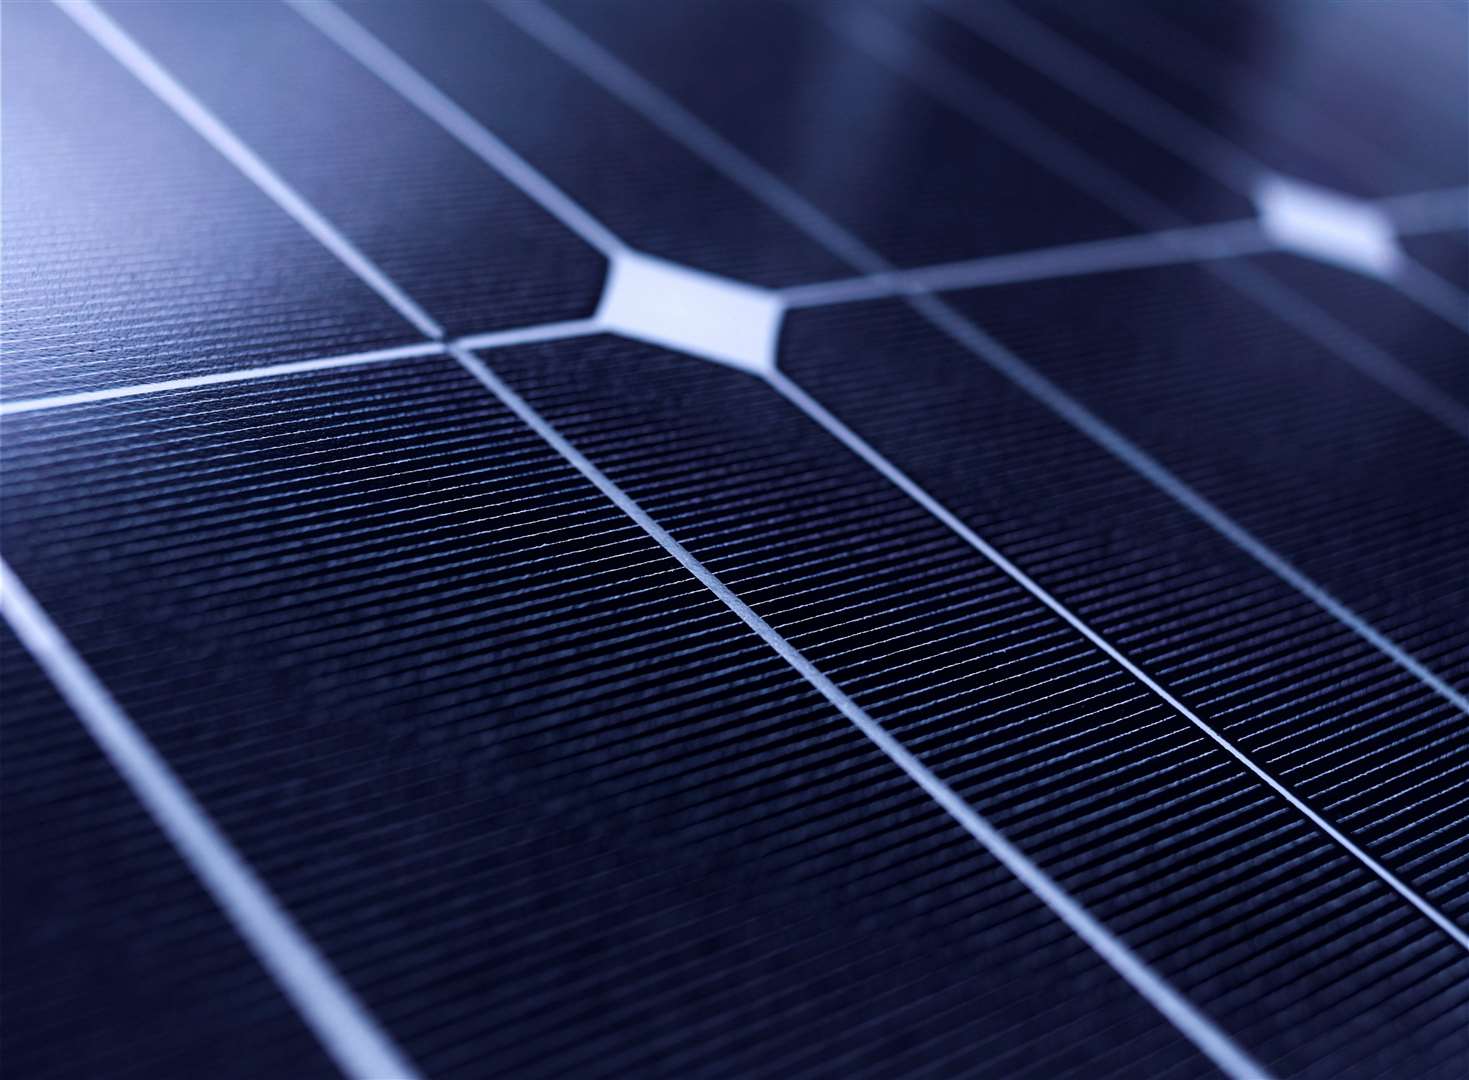 Businesses will be able to use solar panels for premises power when installed to power vehicles.